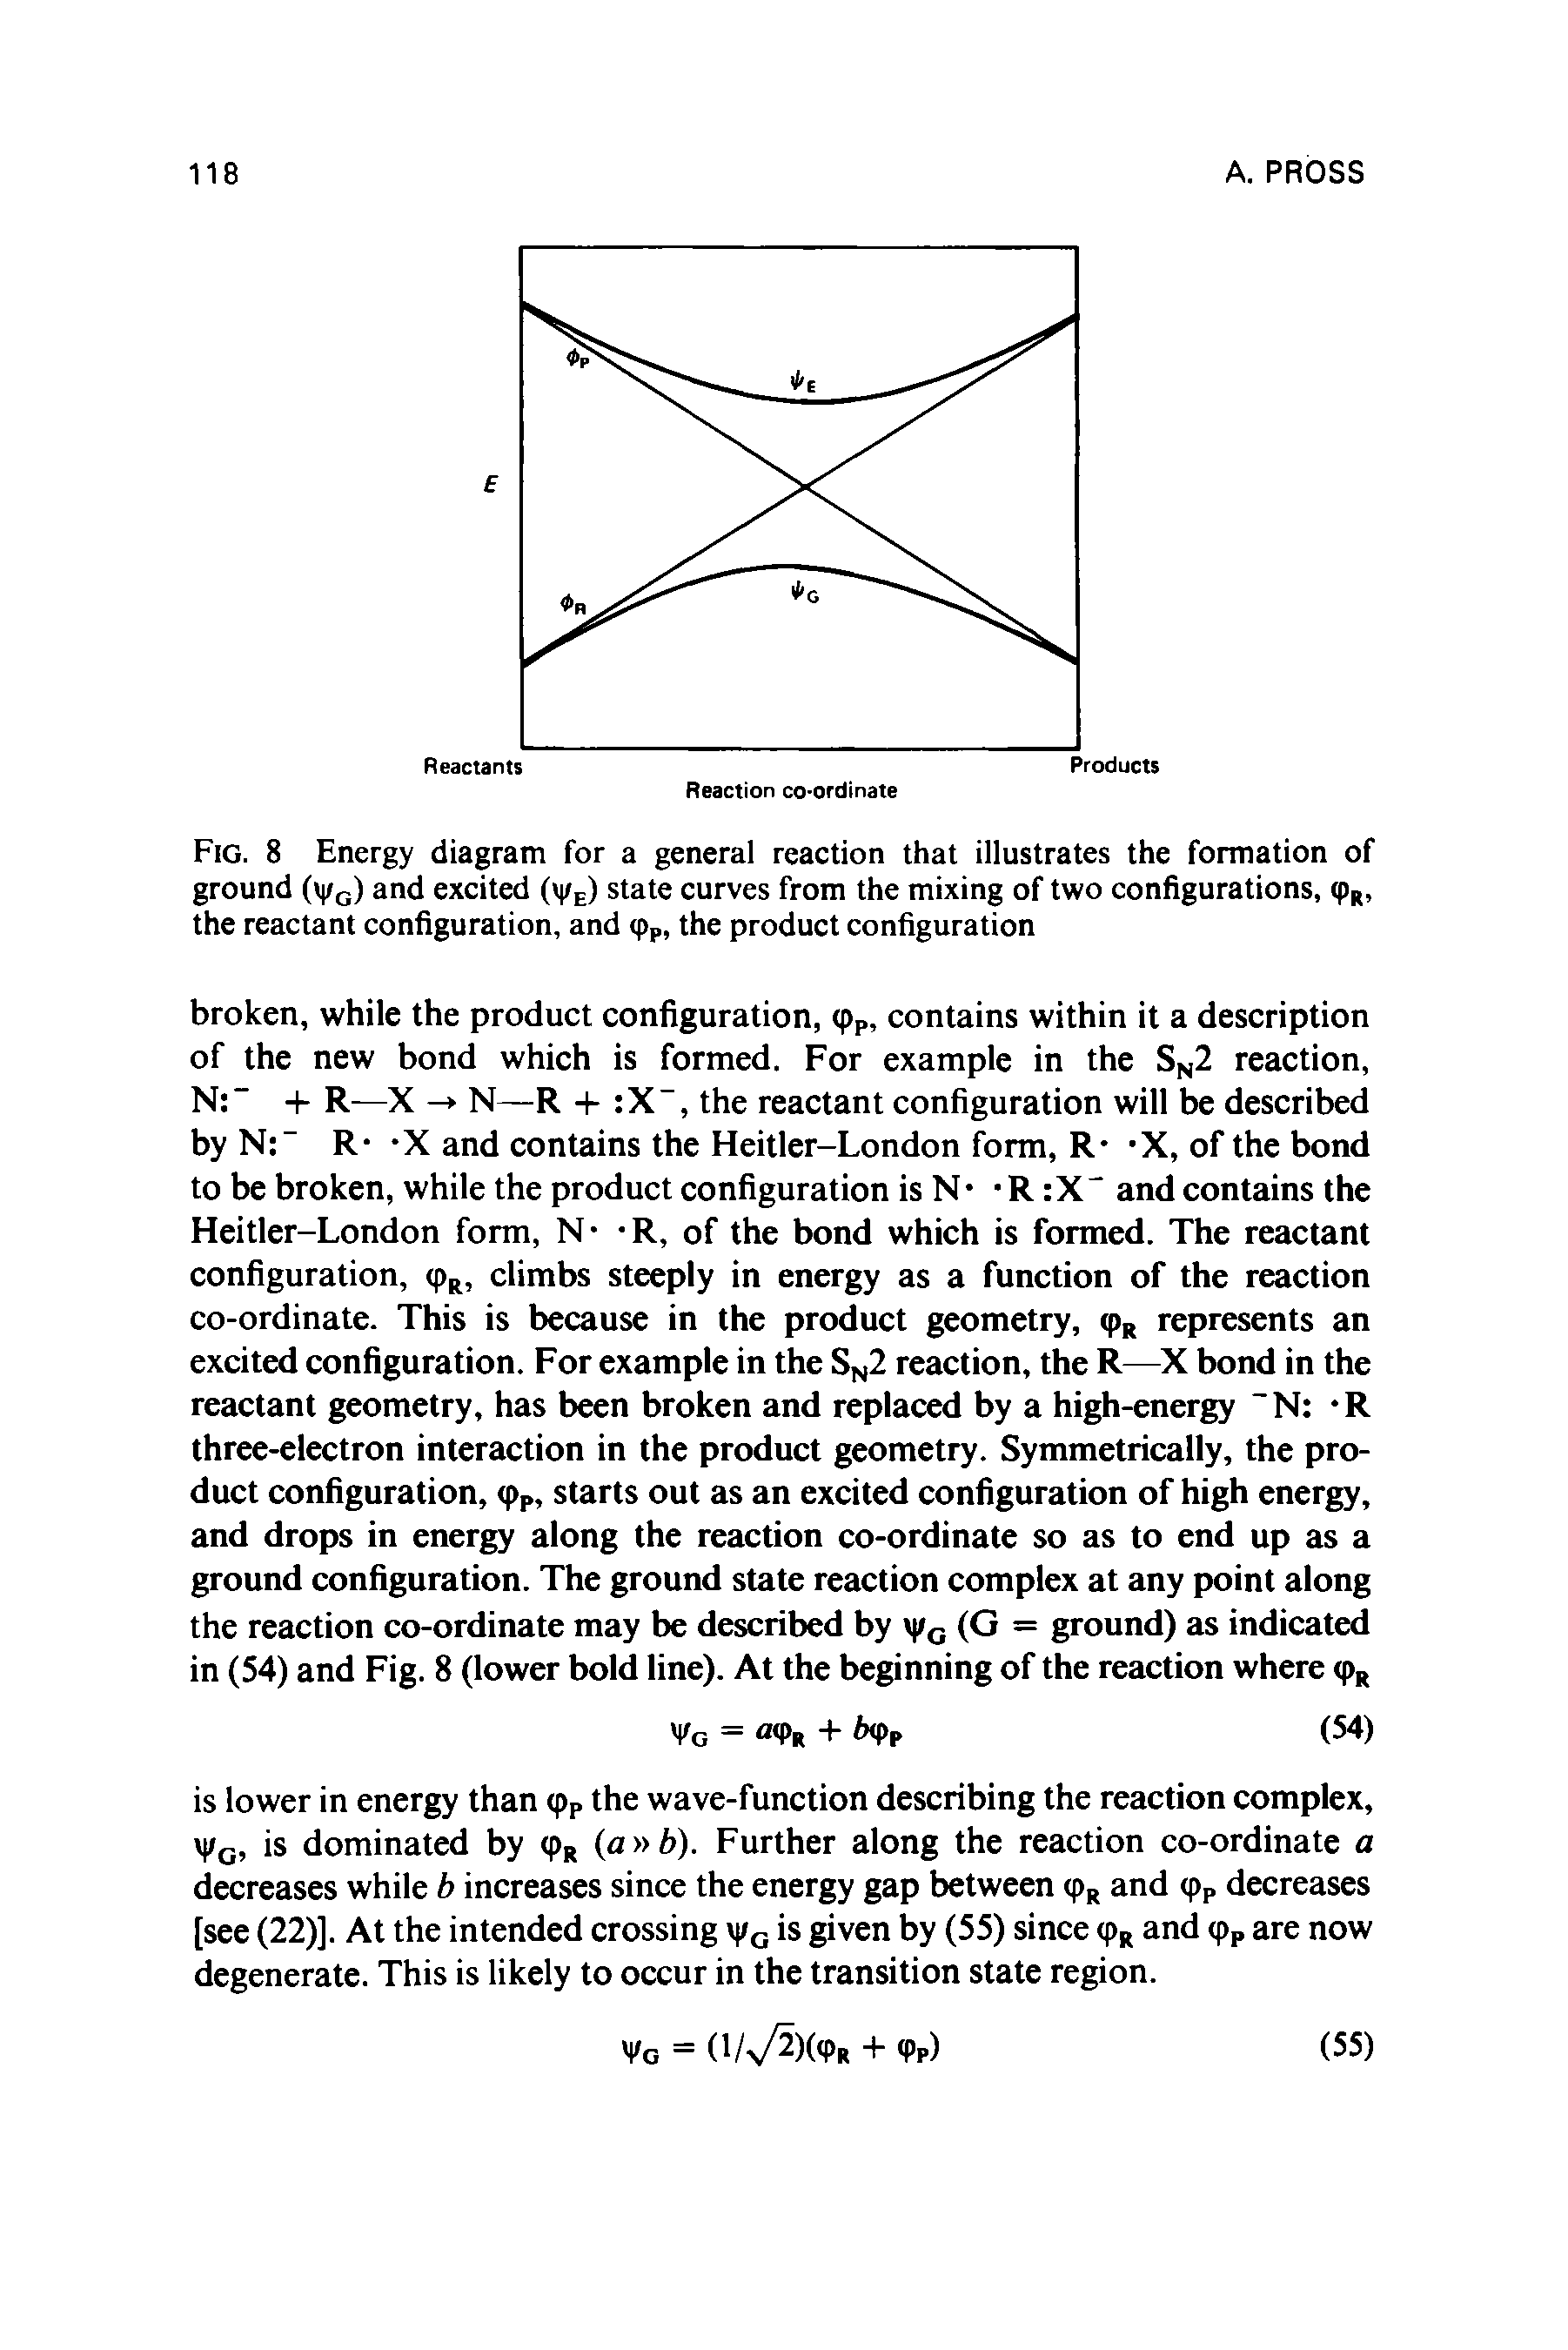 Fig. 8 Energy diagram for a general reaction that illustrates the formation of ground (yG) and excited (yE) state curves from the mixing of two configurations, cpR, the reactant configuration, and <pp, the product configuration...